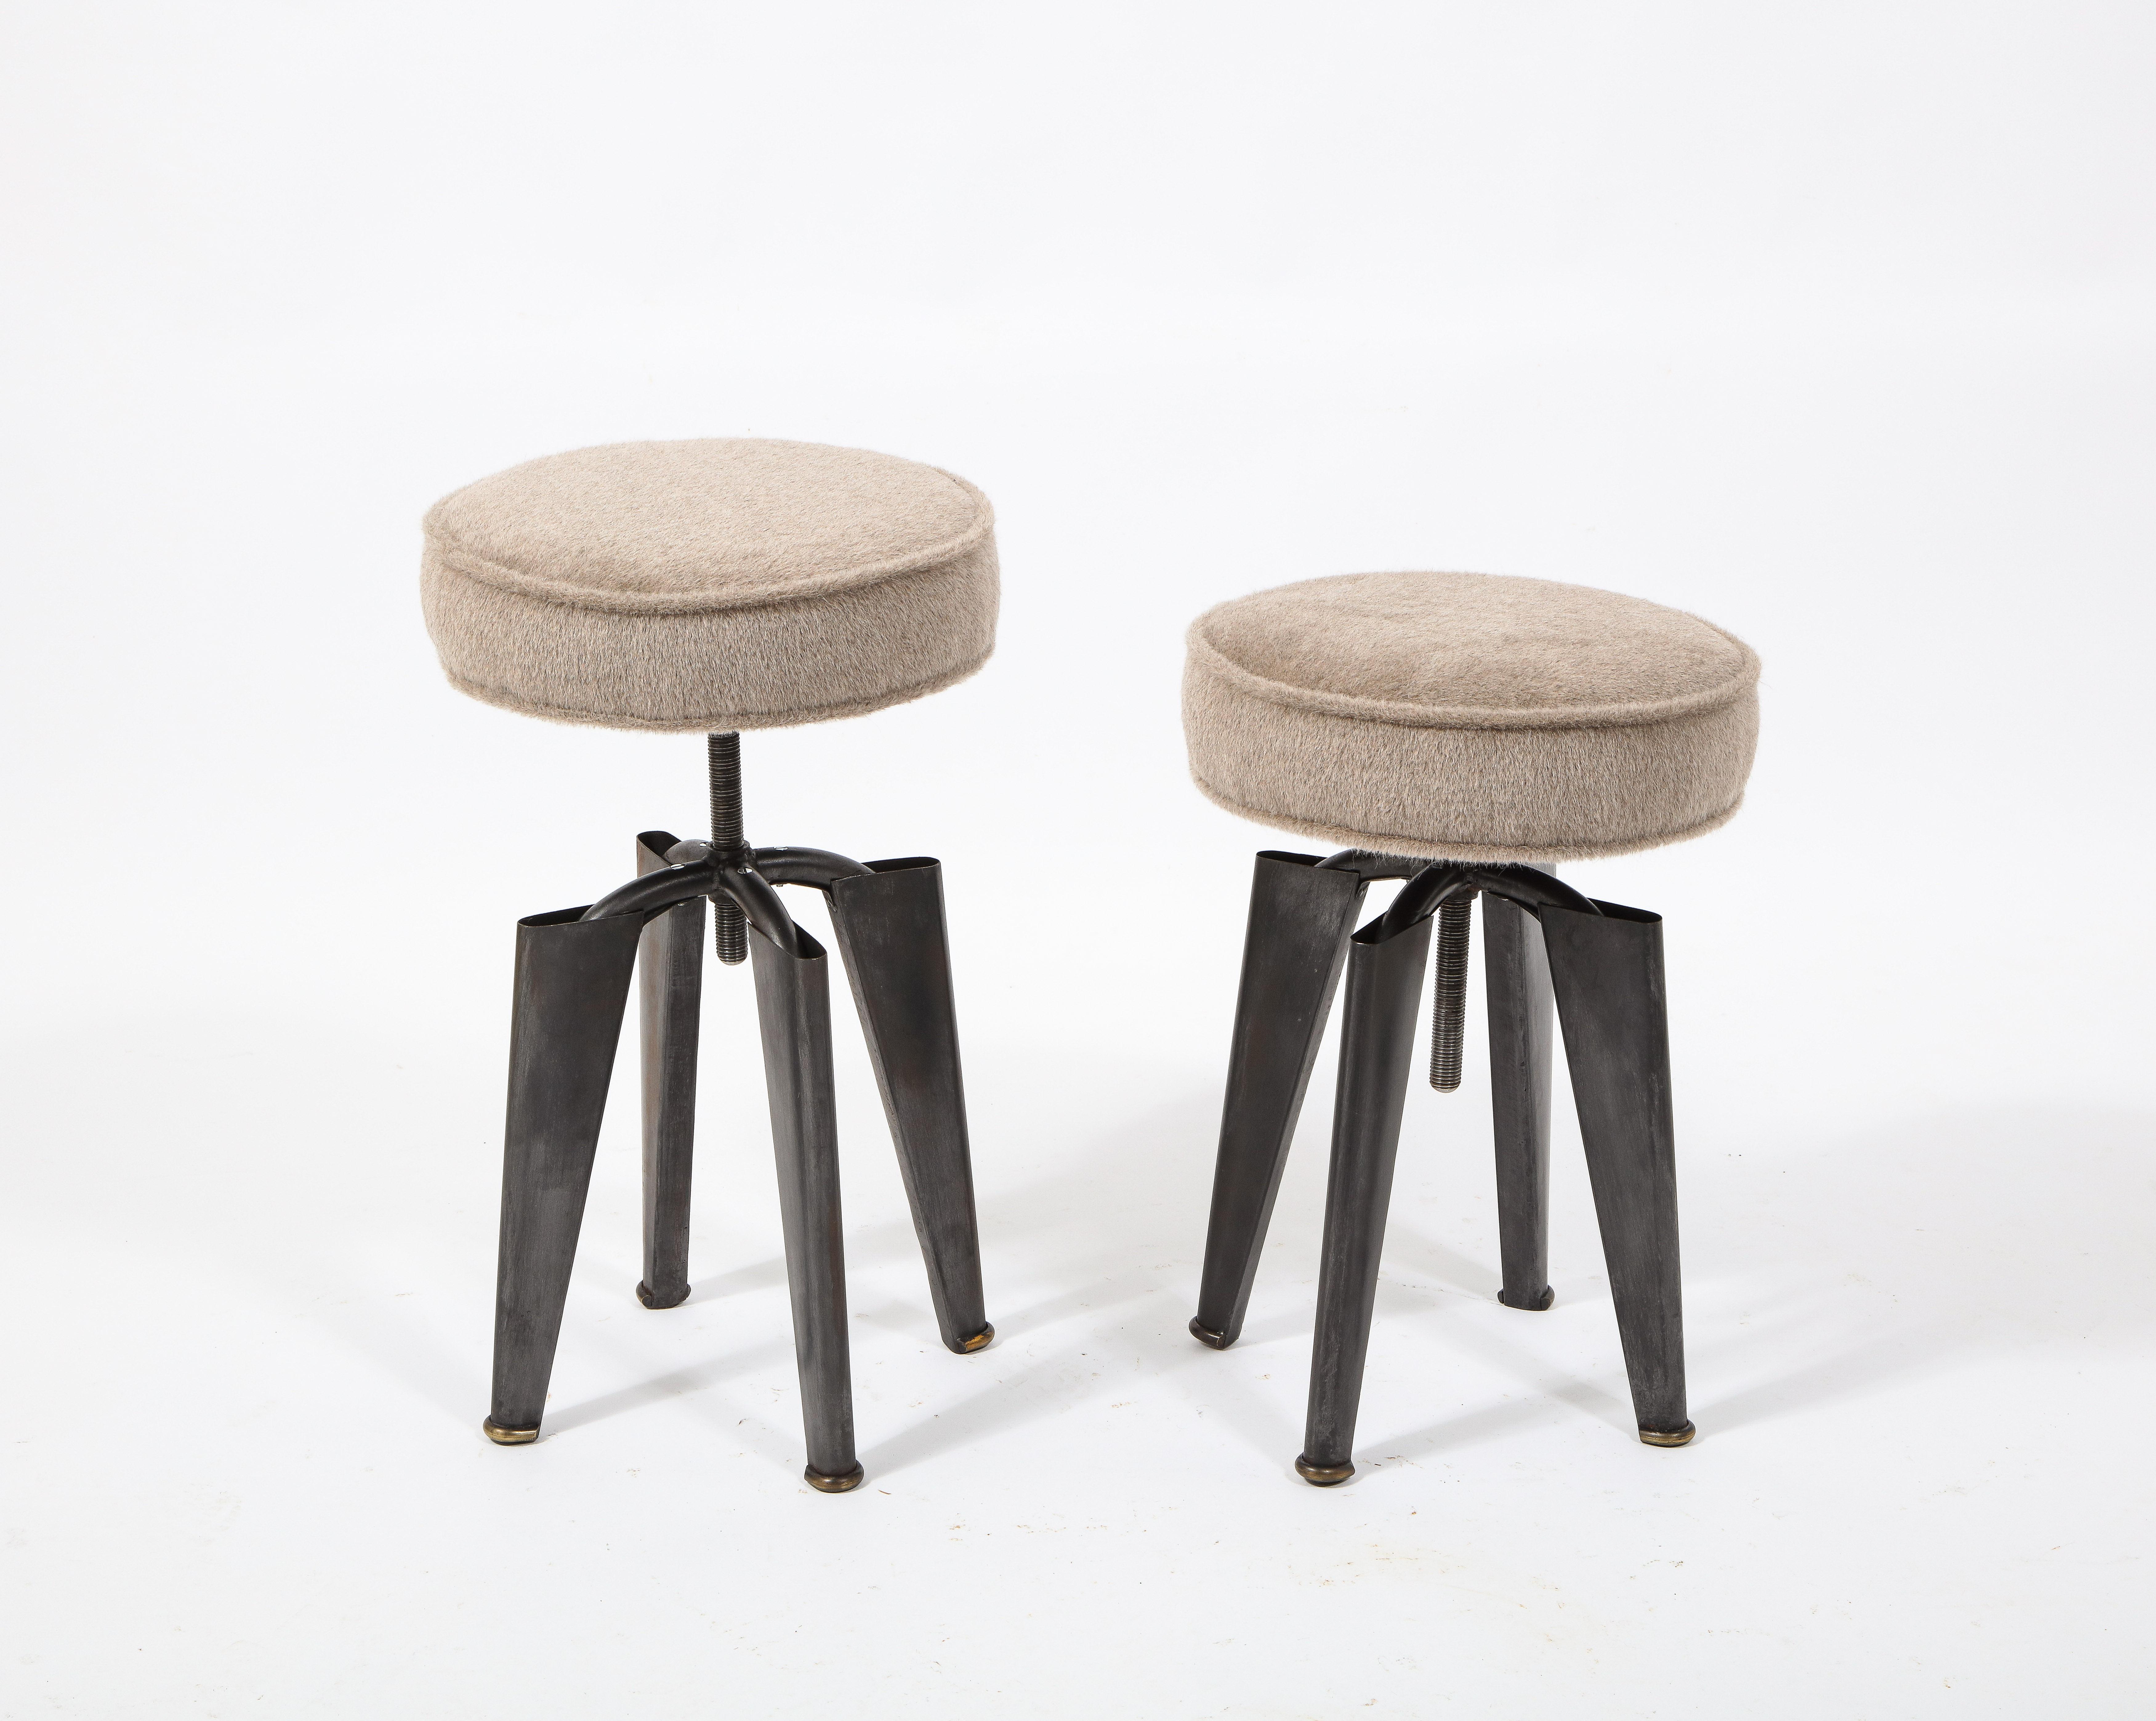 Pair of stools for the Clemenceau French warship designed by Dominique, found throughout the ship in officer quarters, manufactured with the same processes used in Prouvé furniture, pressed and folded steel with a long adjustable stem, freshly